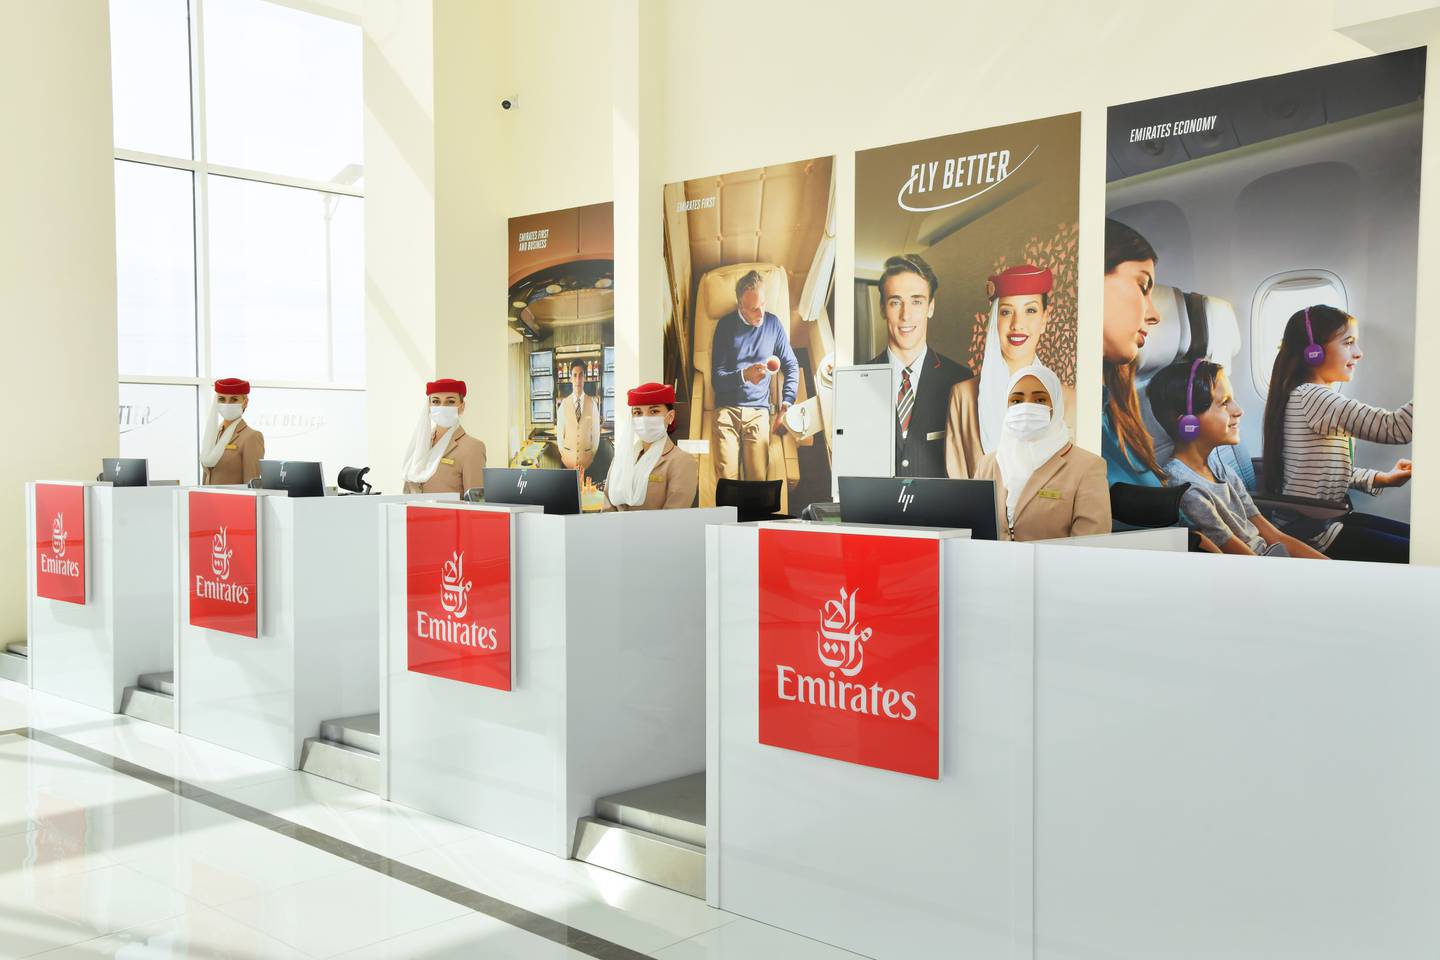 Travellers flying Emirates can check-in for flights at the remote facility in Ajman. Photo: Emirates